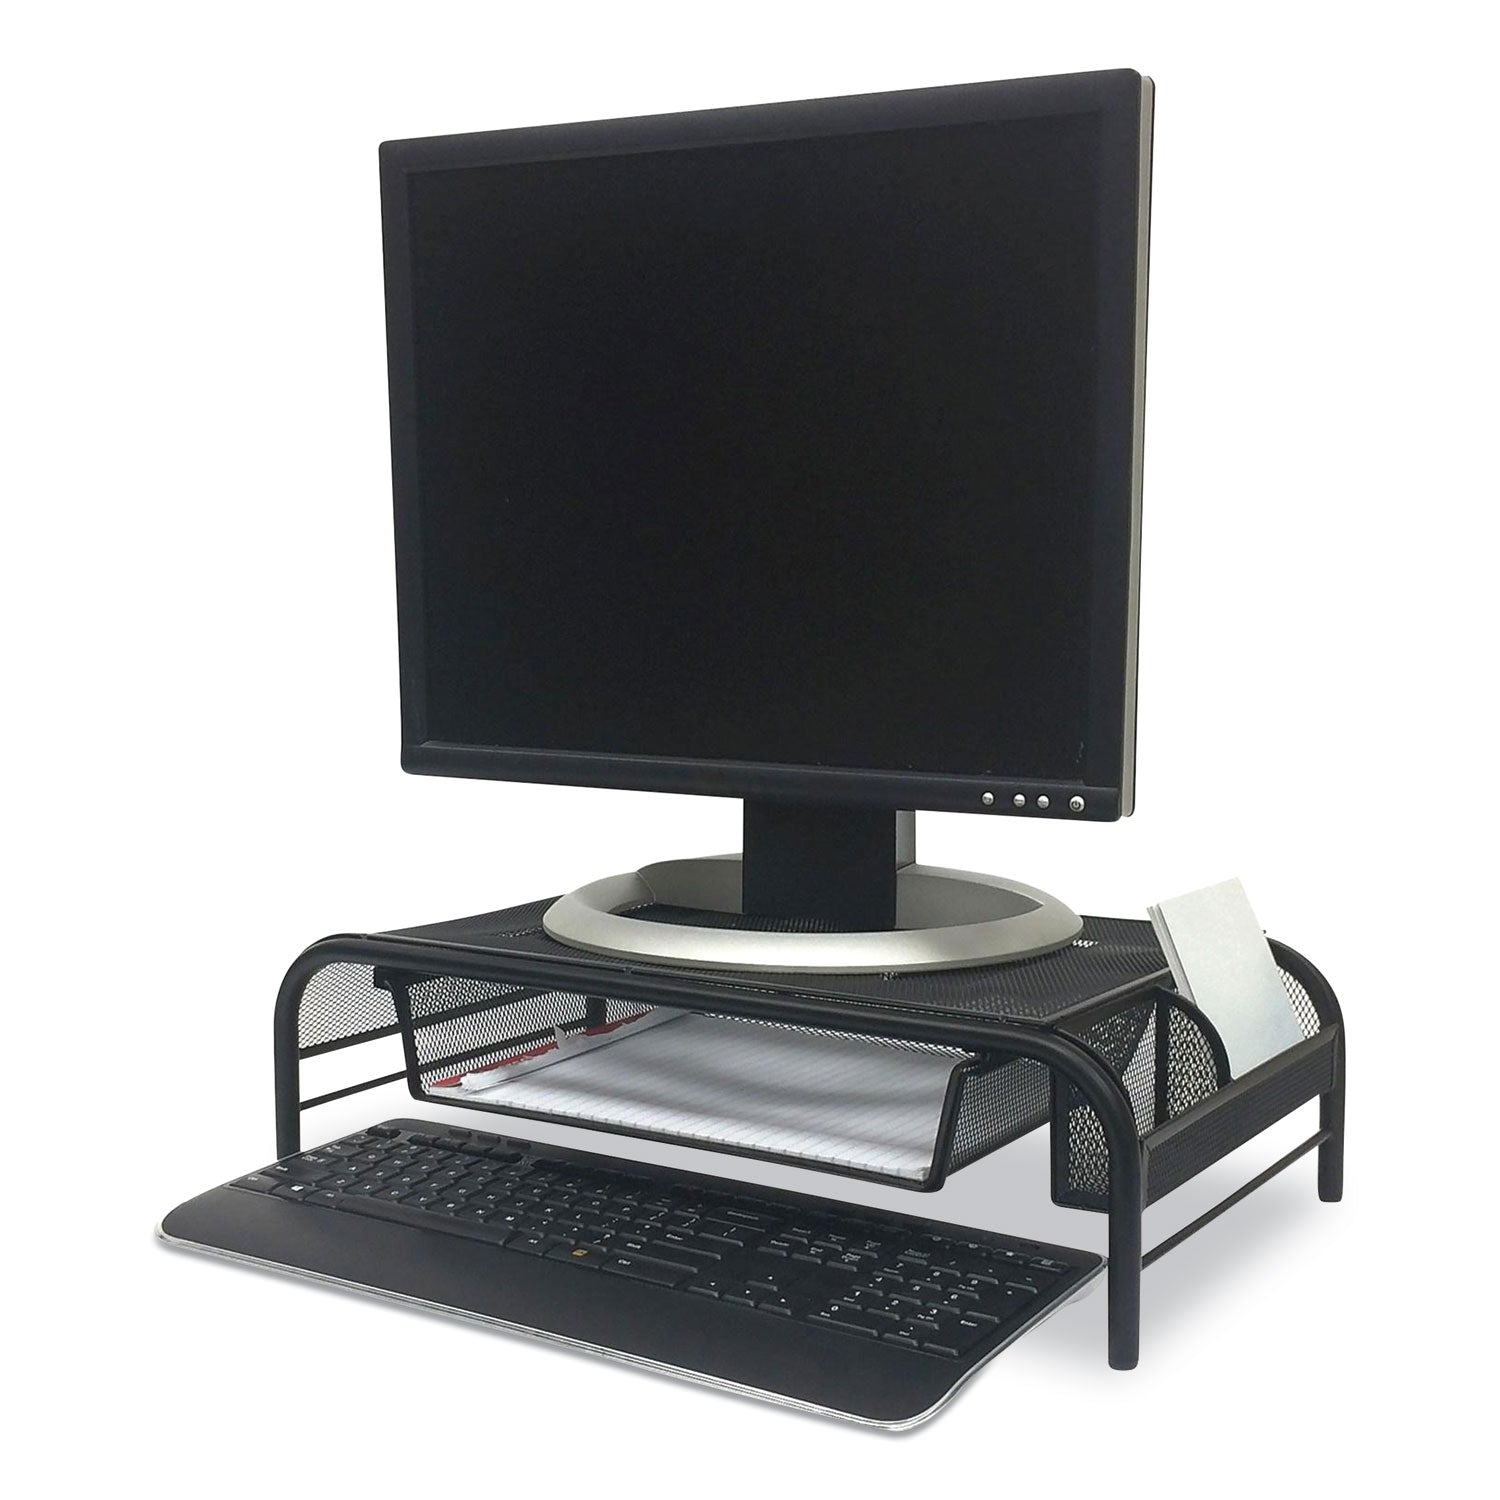 raise-metal-mesh-monitor-stand-with-drawer-20-x-115-x-56-black-supports-25-lbs_emsmmblk - 2